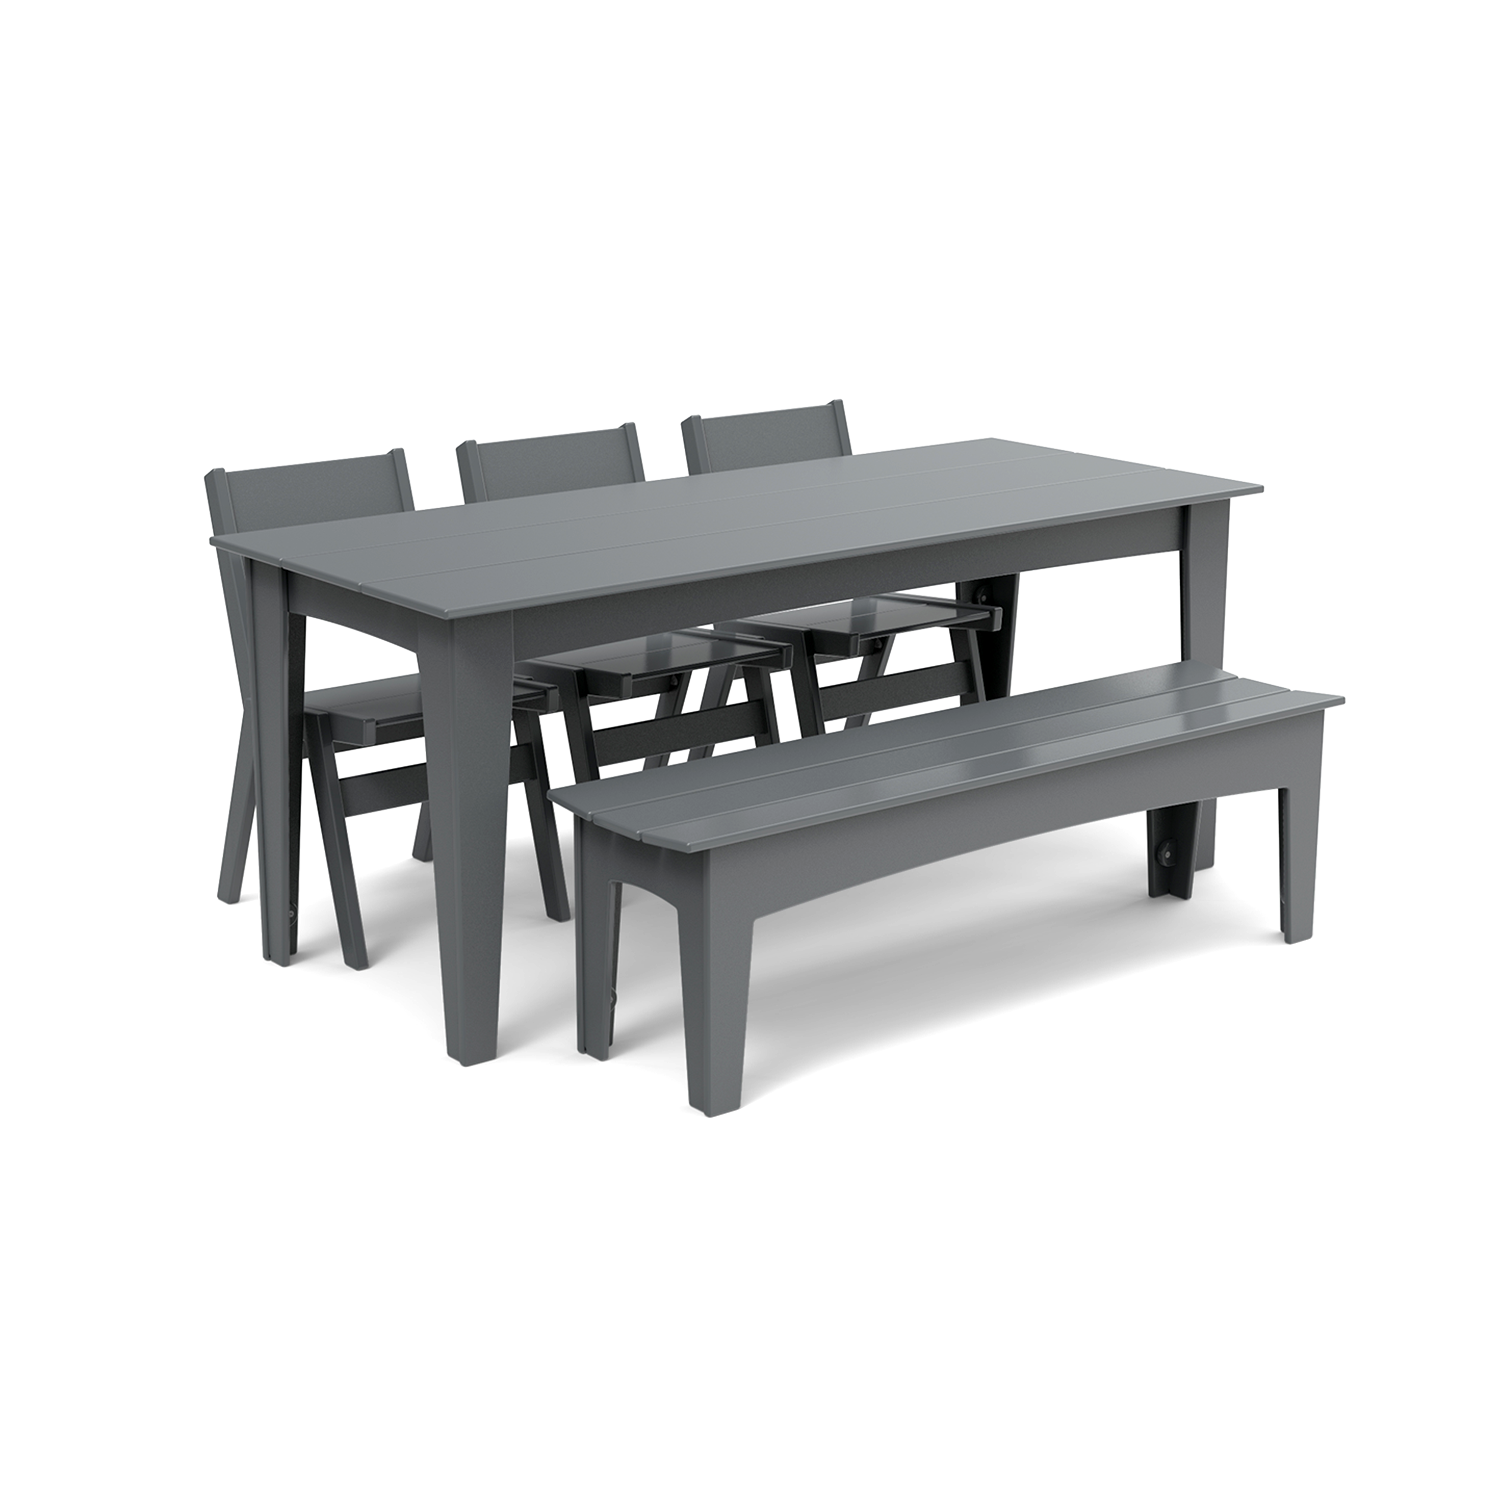 Alfresco Dining Table 72 with Bench and Chairs Set